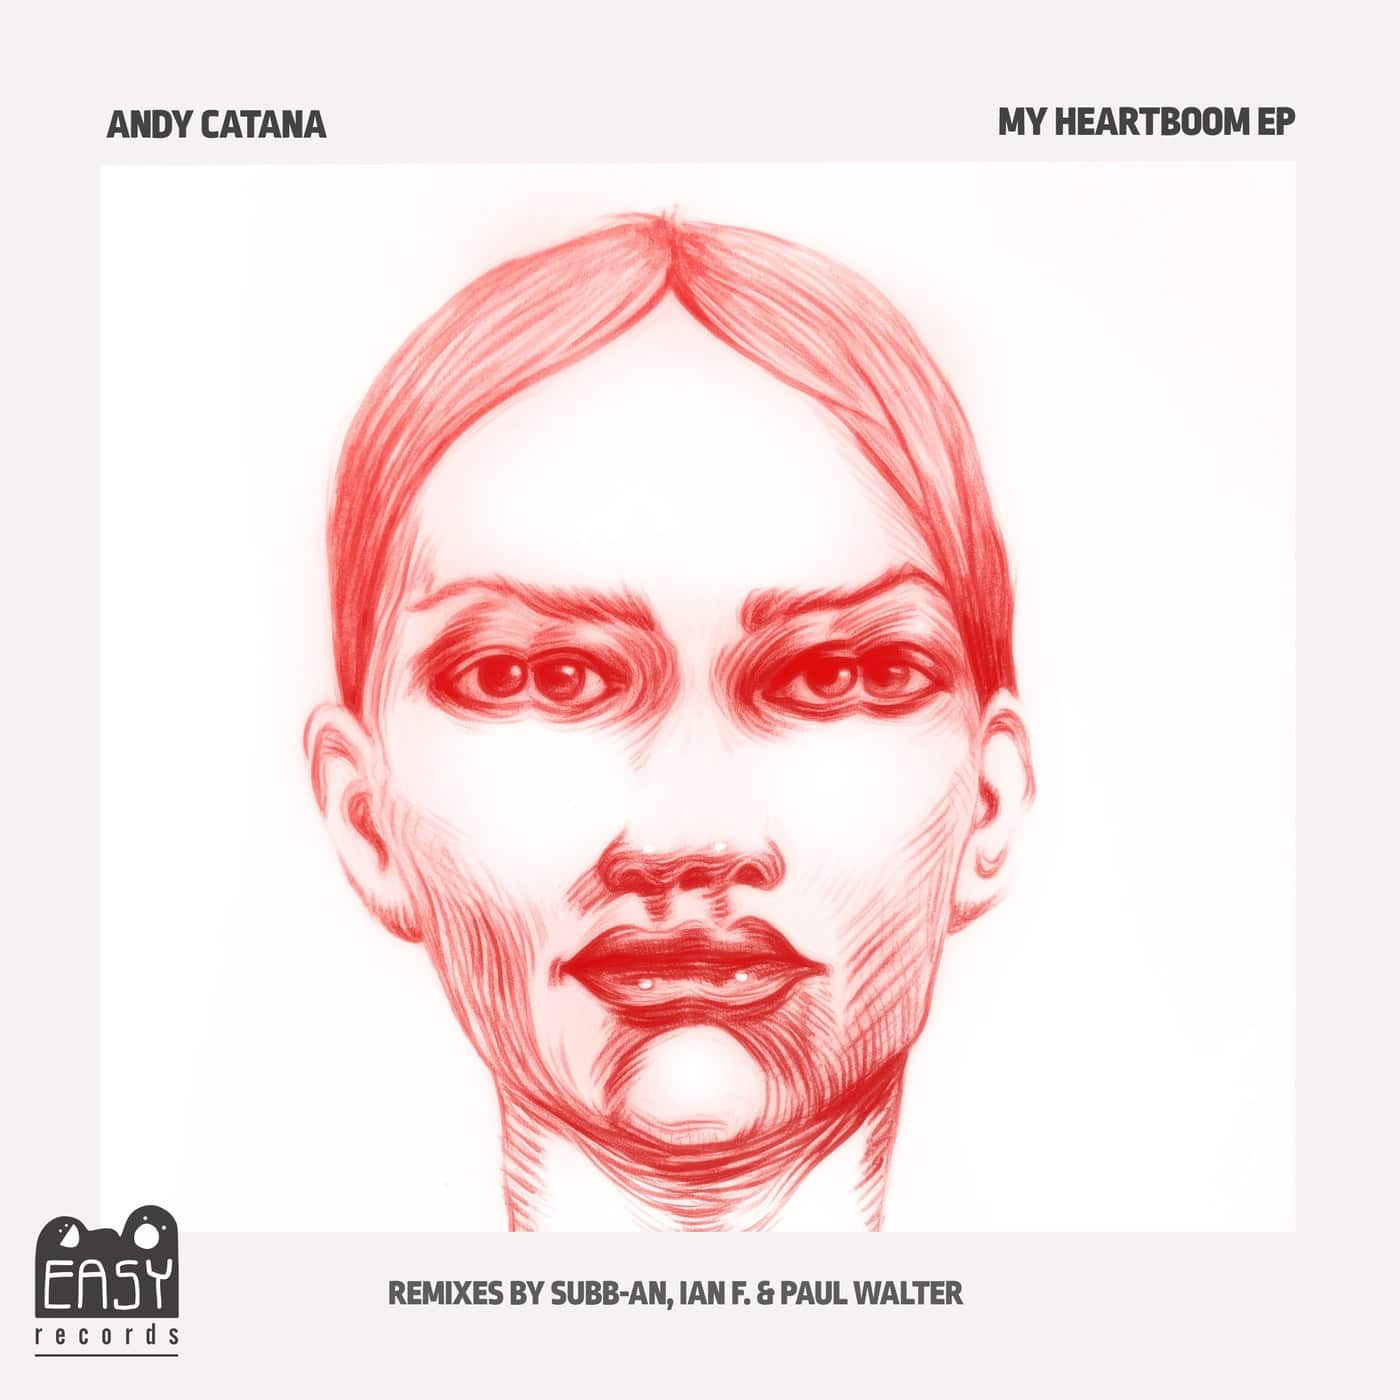 Download Andy Catana - My Heartboom EP (Remixes by Subb-An, Ian F. & Paul Walter) on Electrobuzz